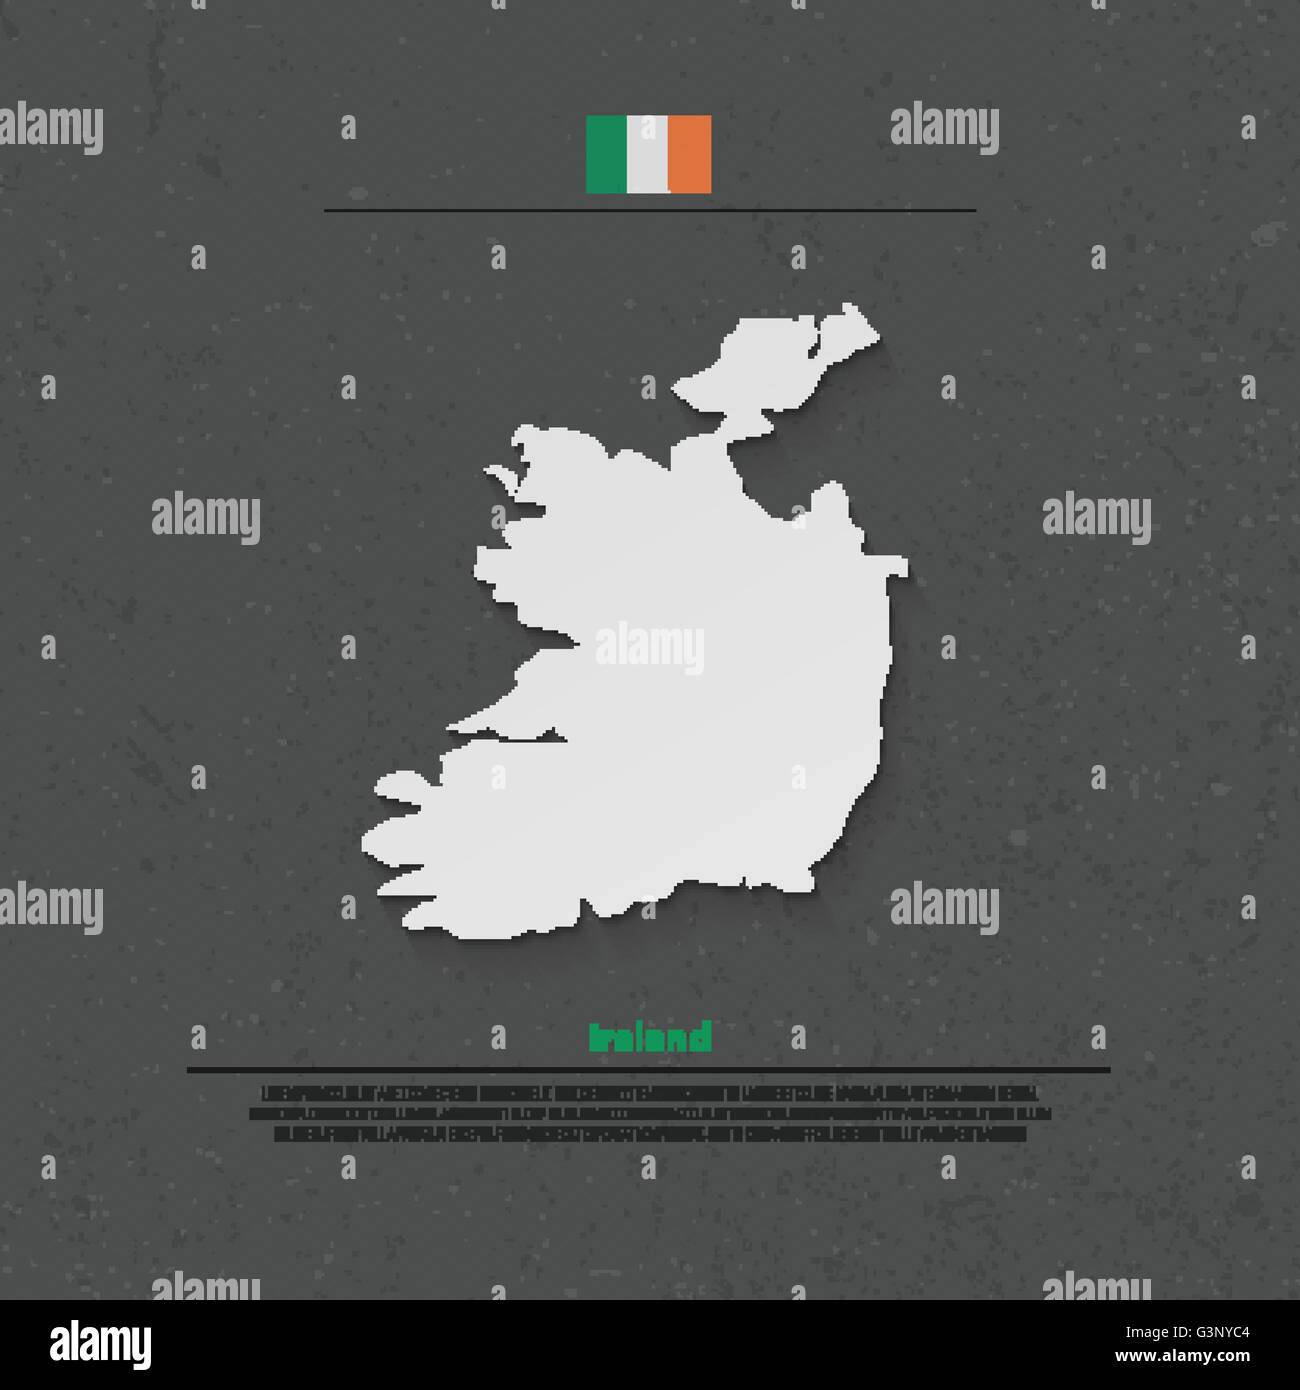 Republic of Ireland isolated map and official flag icons. vector Irish political map 3d illustration over paper texture. EU geog Stock Vector